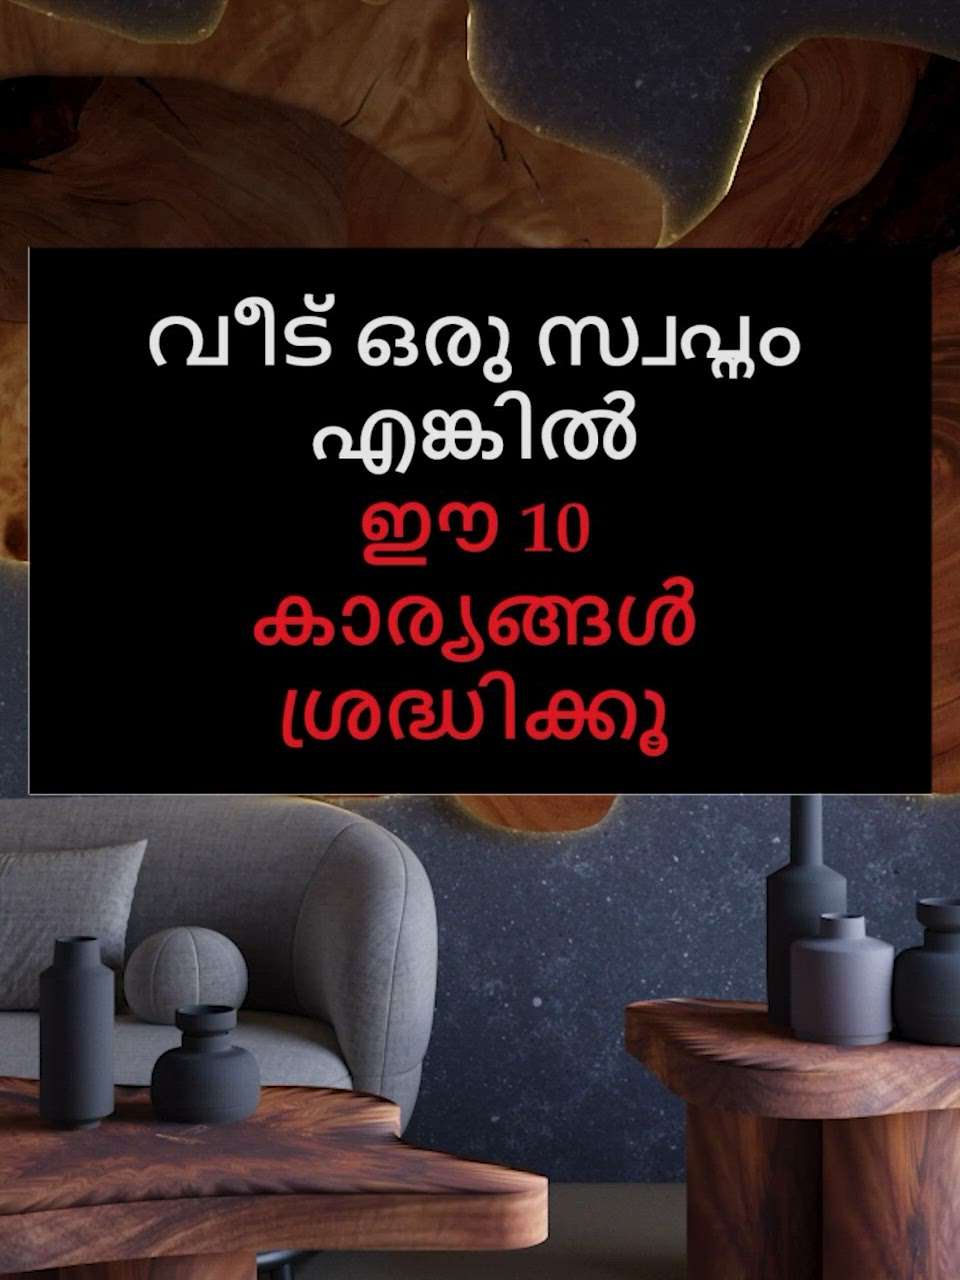 Home tips and tricks 
Content reference : Manorama News  #HouseDesigns #architecturedesigns  #LivingroomDesigns  #dream_interiors